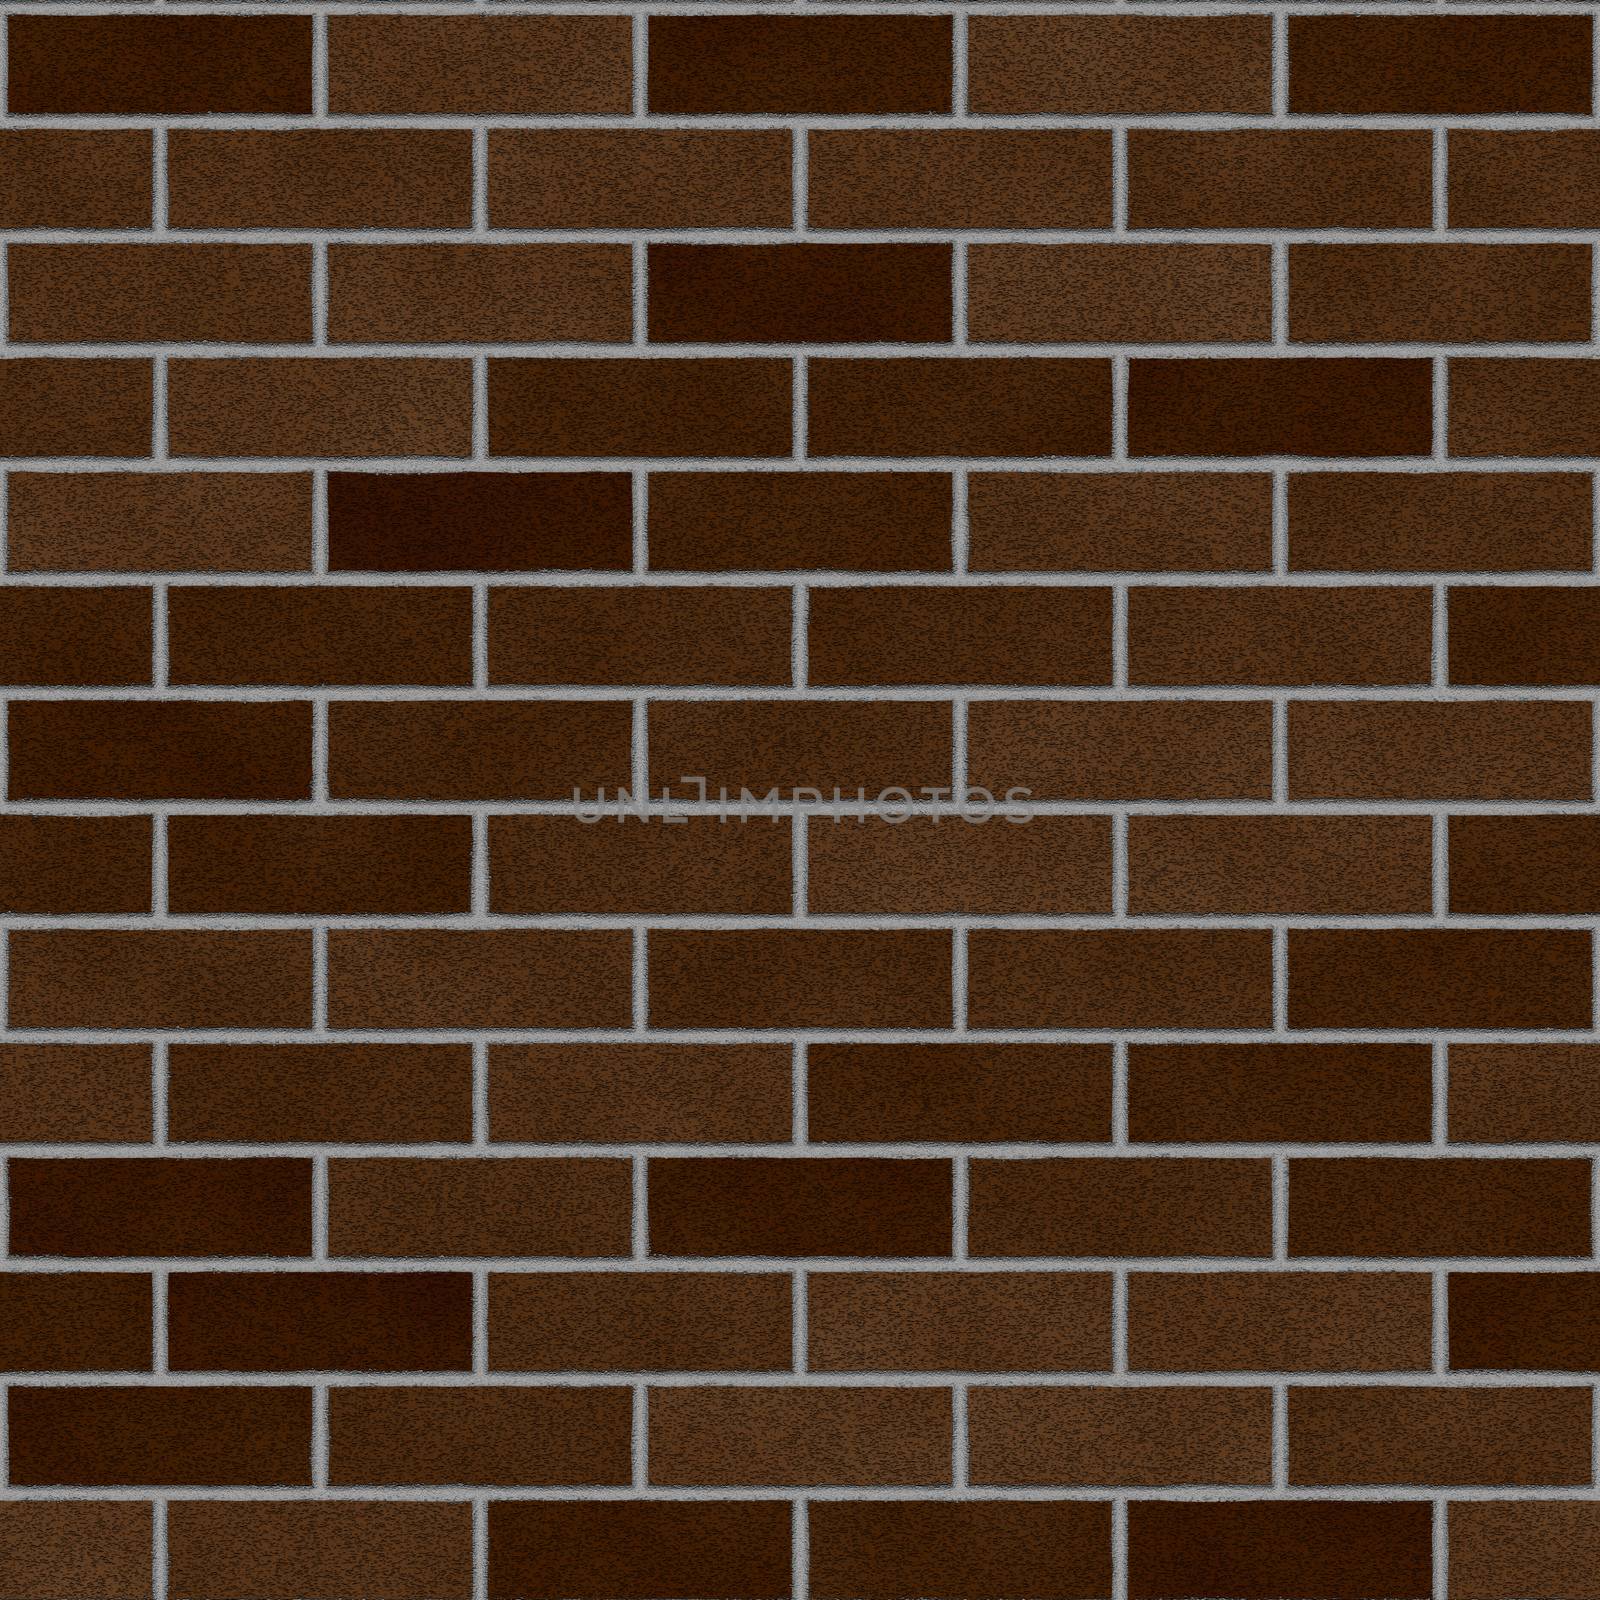 Chocolate brown clay brick wall seamless texture, computer generated background.